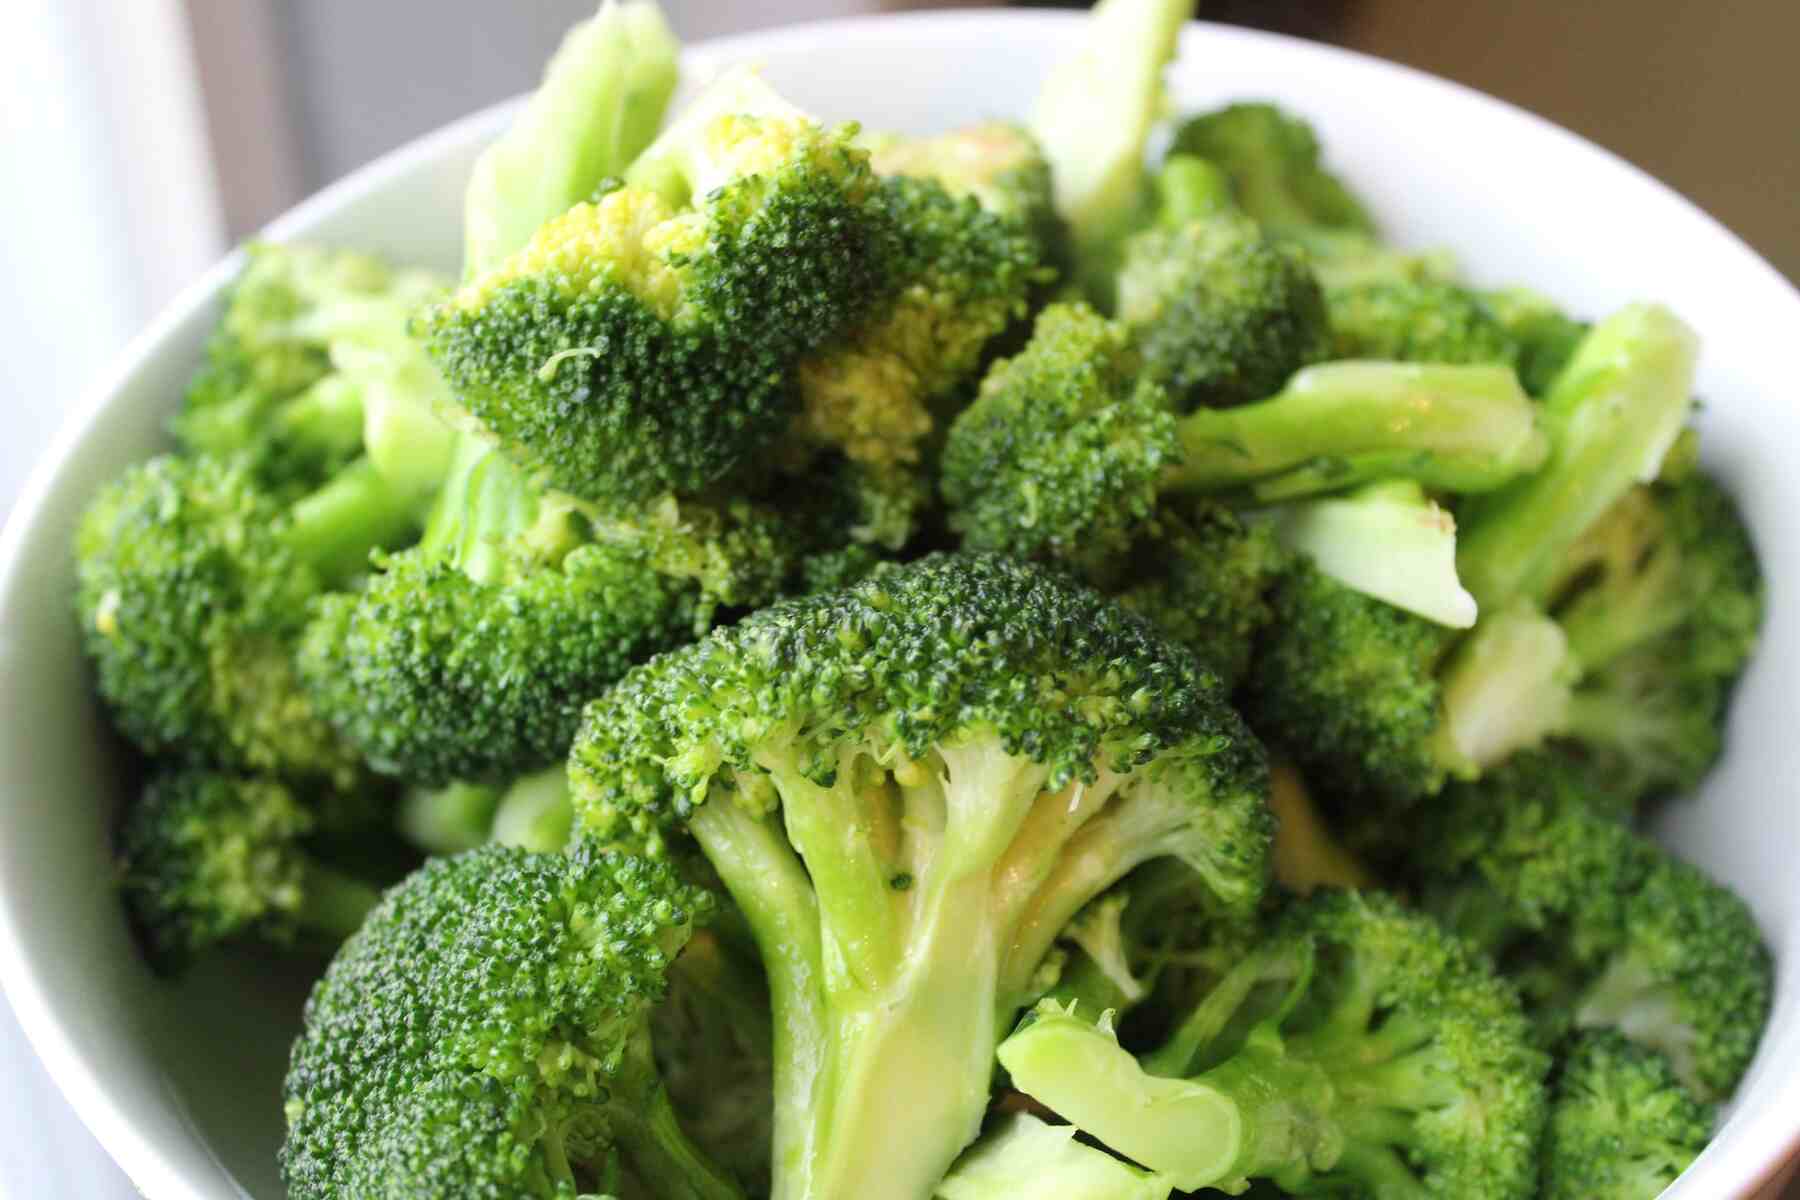 Cooking (Or Not Cooking) Broccoli To Protect Its Nutritional